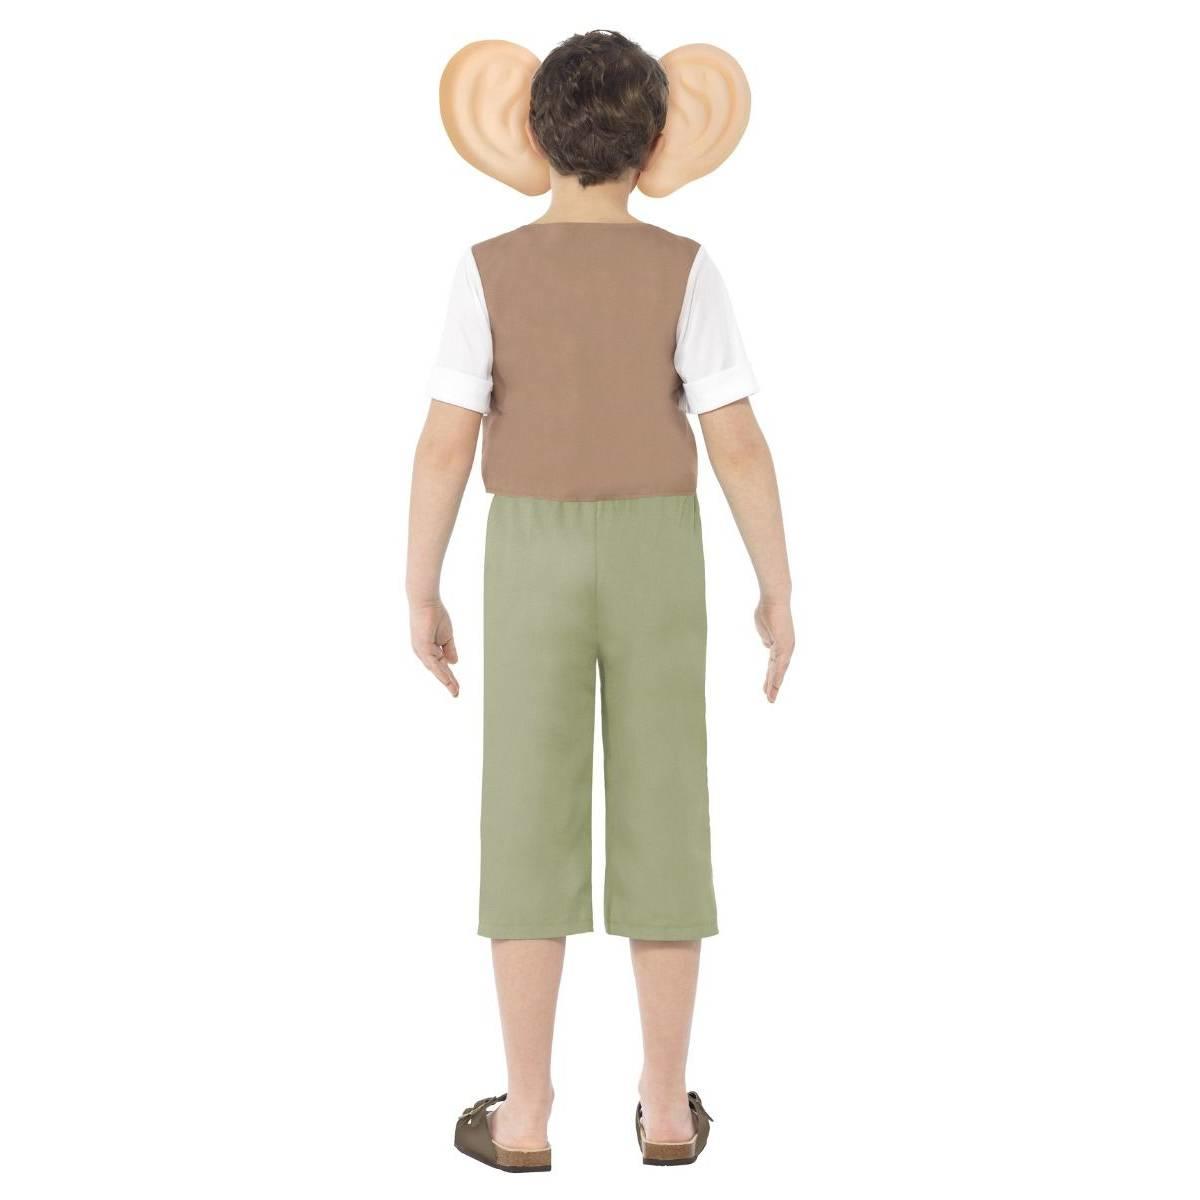 Back view of Roald Dahl BFG Fancy Dress Costume for Children by Smiffys 27145 available here at Karnival Costumes online party shop